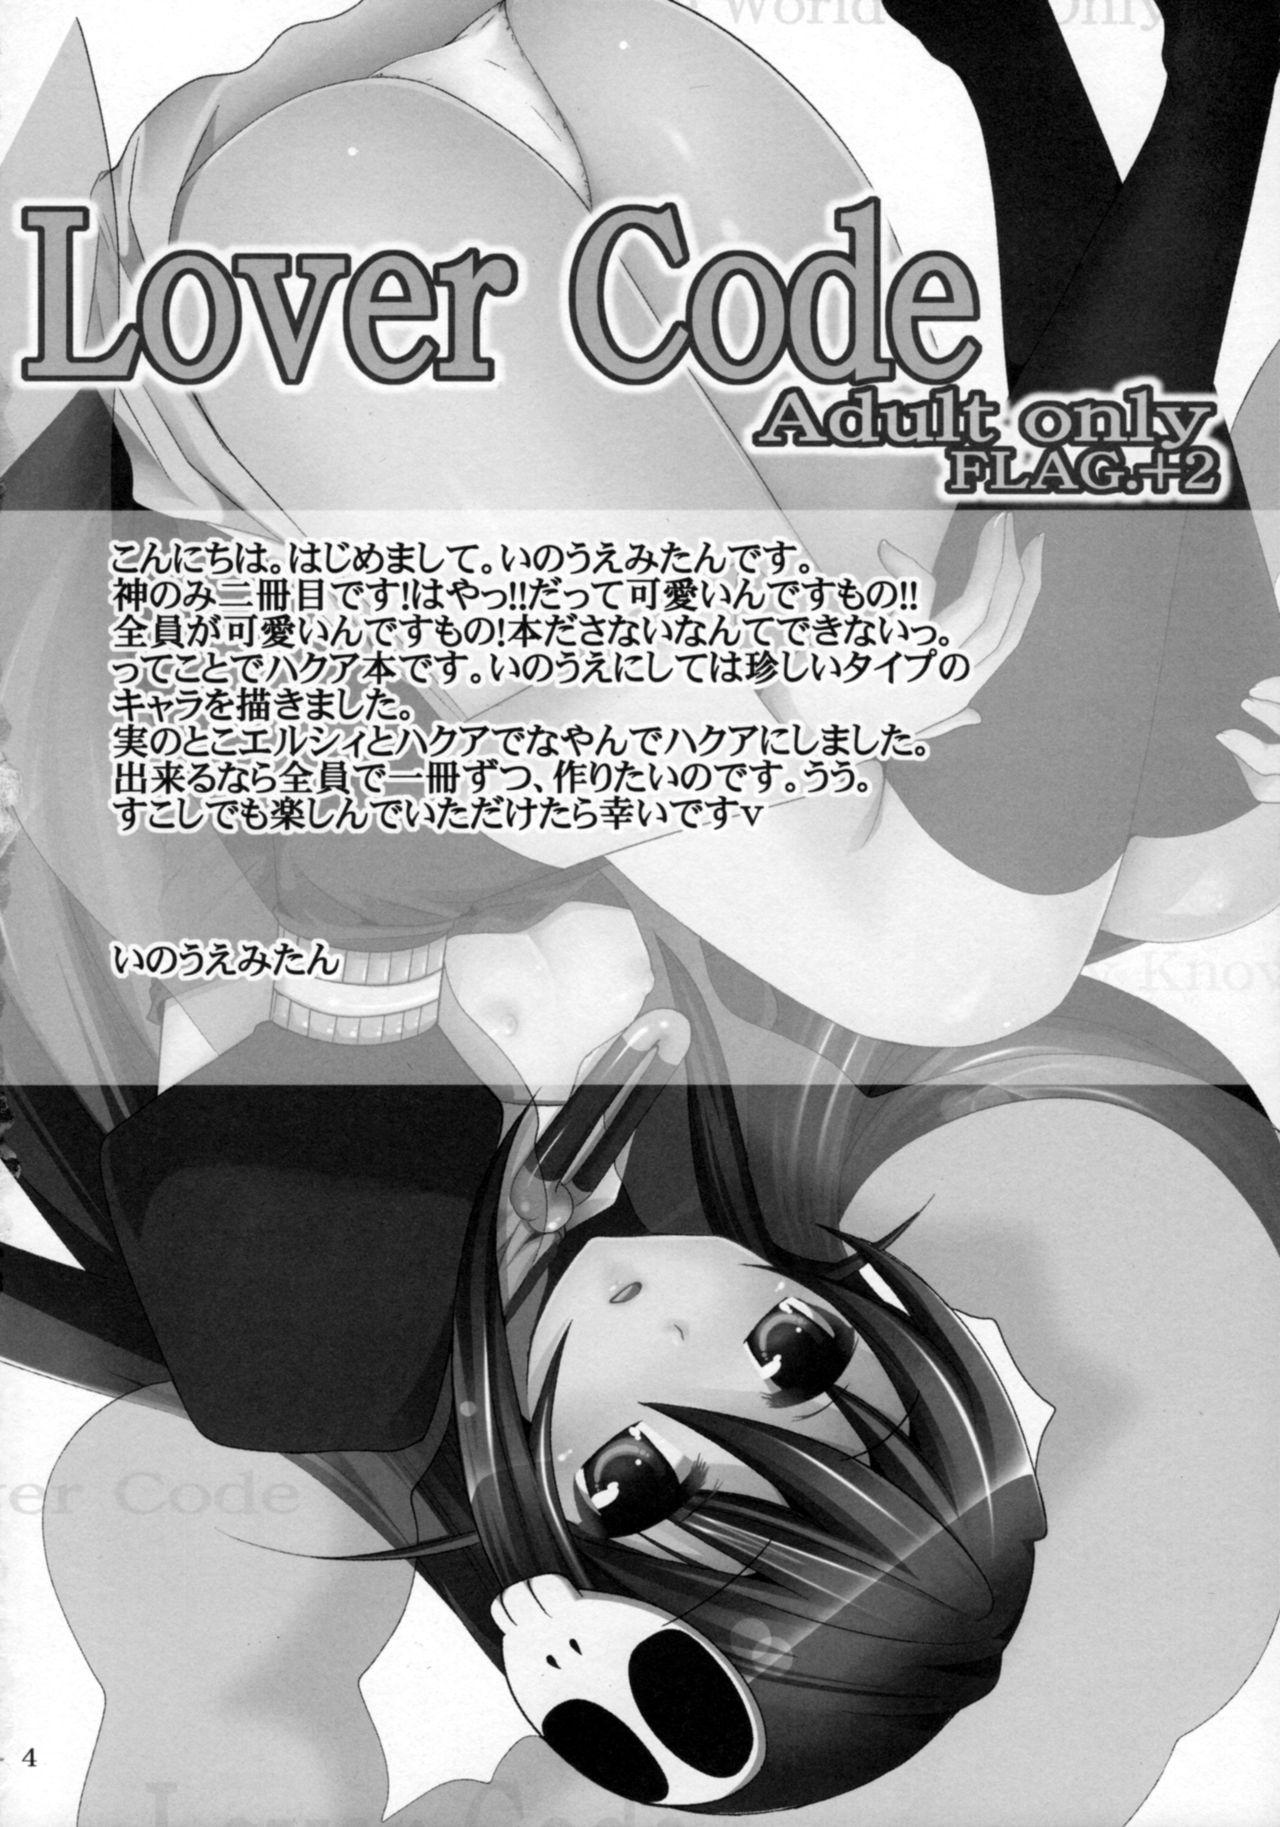 Big Cock Lover Code - The world god only knows 18 Year Old - Page 3